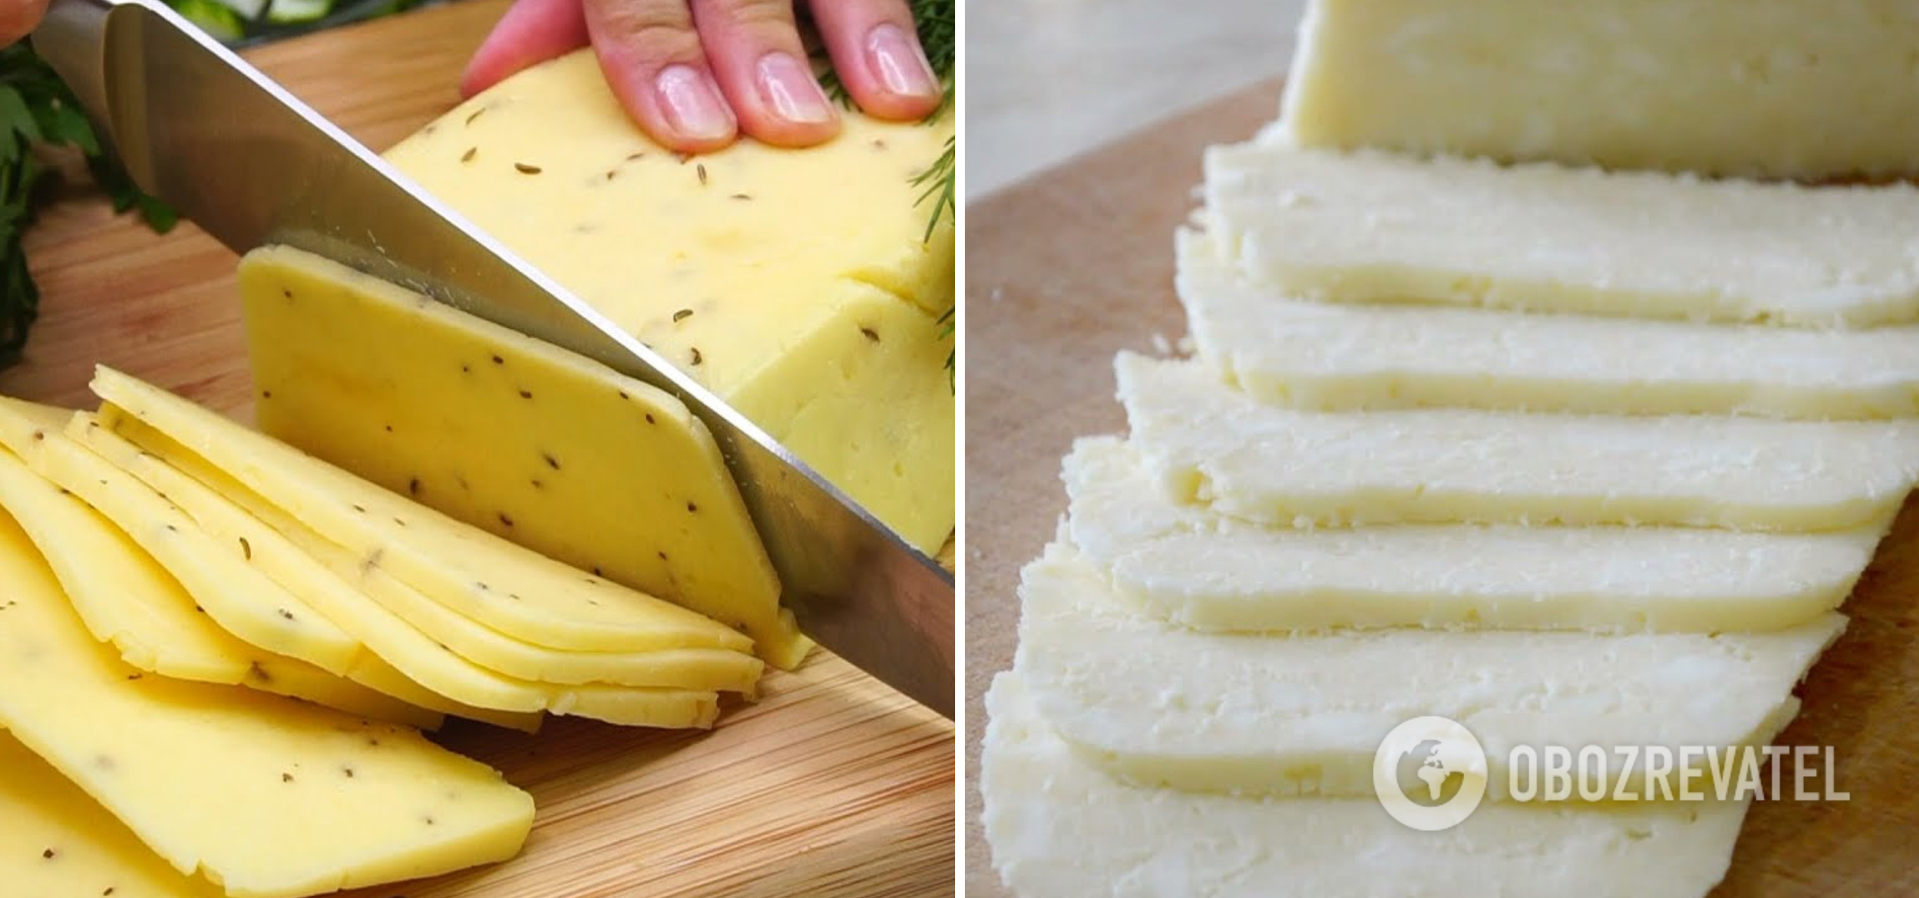 How to make hard cheese at home